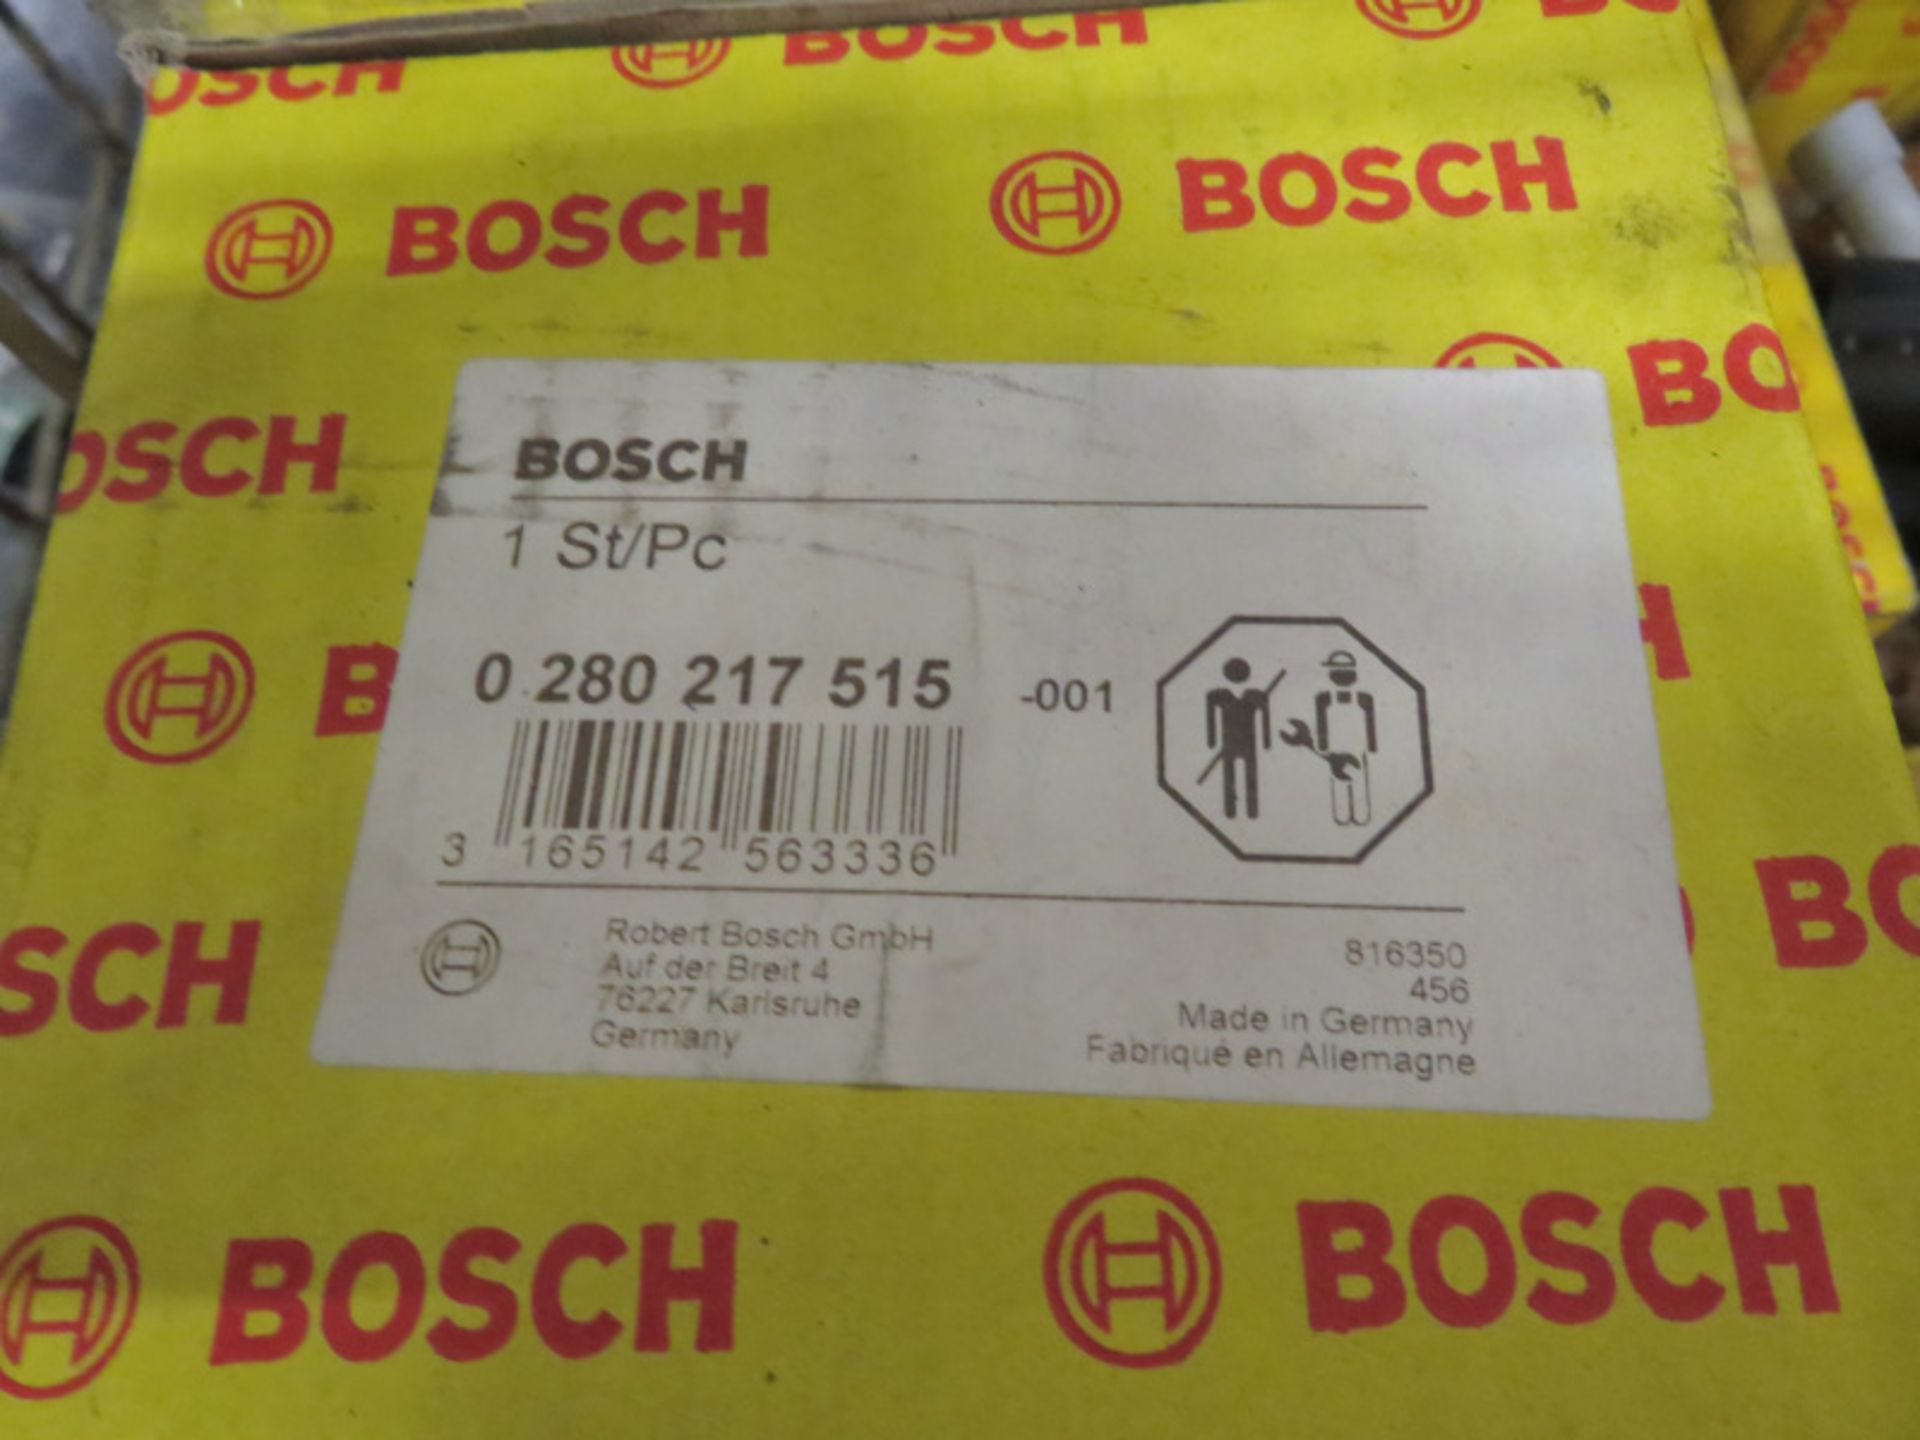 Vehicle parts - Bosch, Delphi - see pictures for models and types - Image 3 of 13